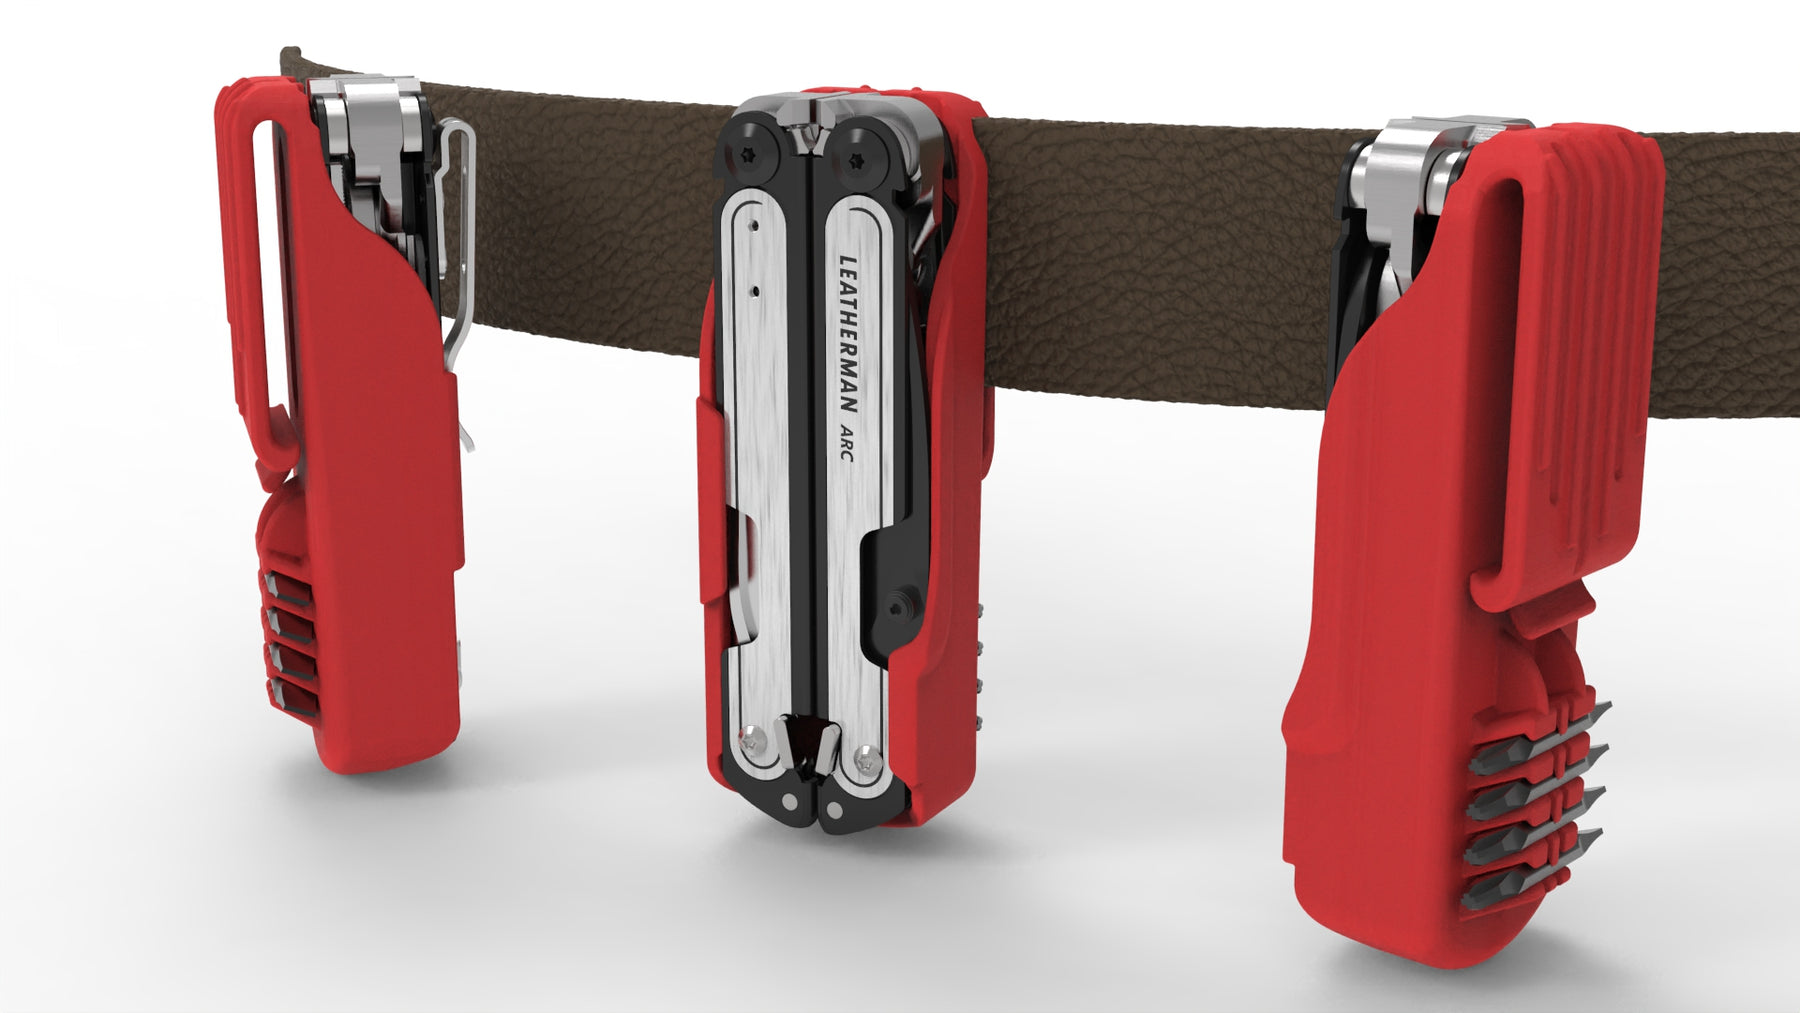 Steel Comb for the Leatherman ARC and FREE series – ZapWizard Design